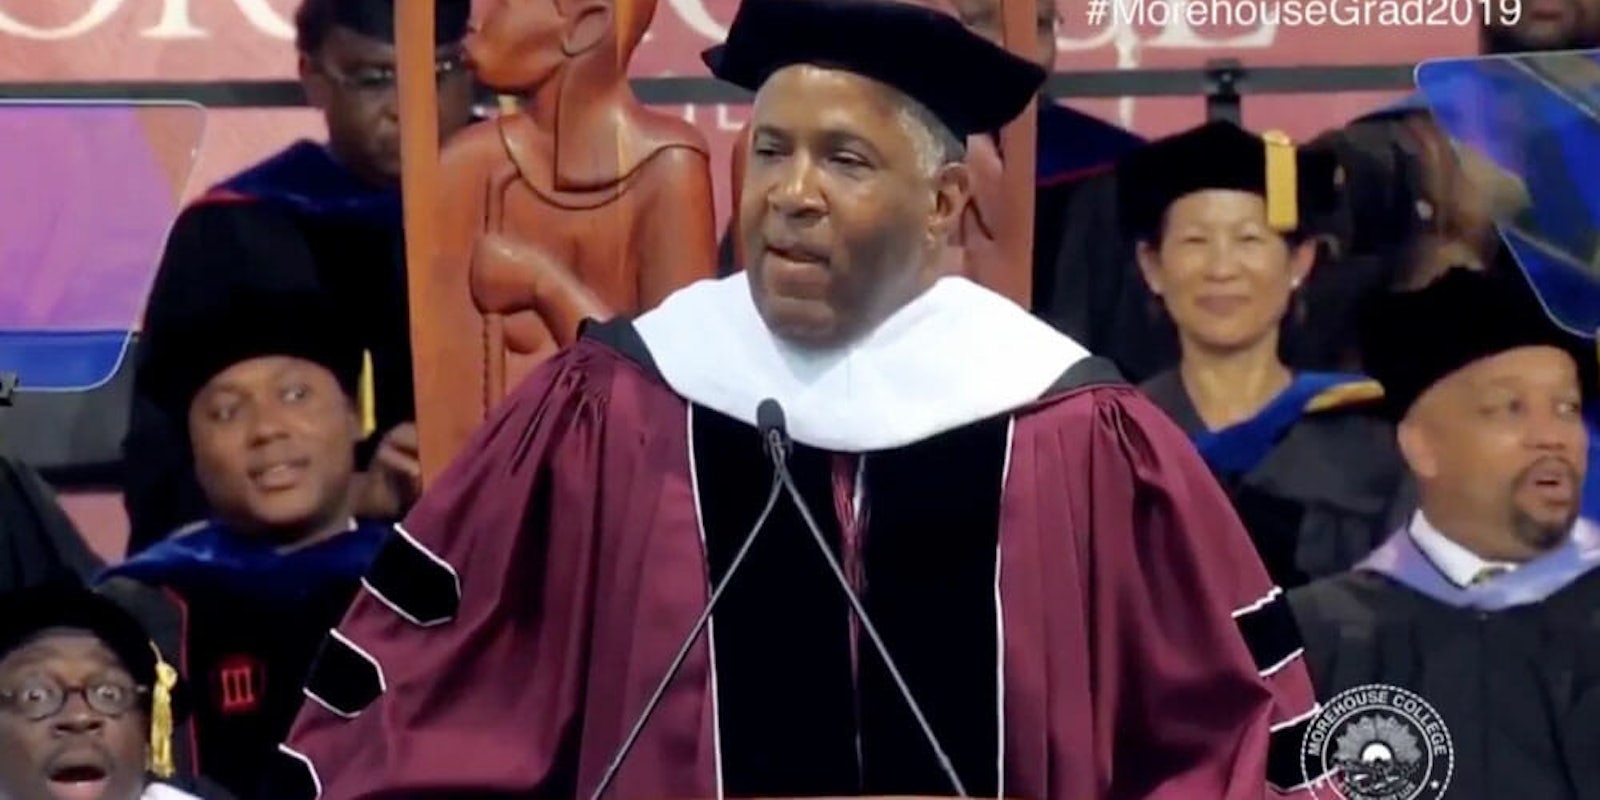 Morehouse College commencement speaker Robert F Smith makes the announcement to pay off graduating class' student loans